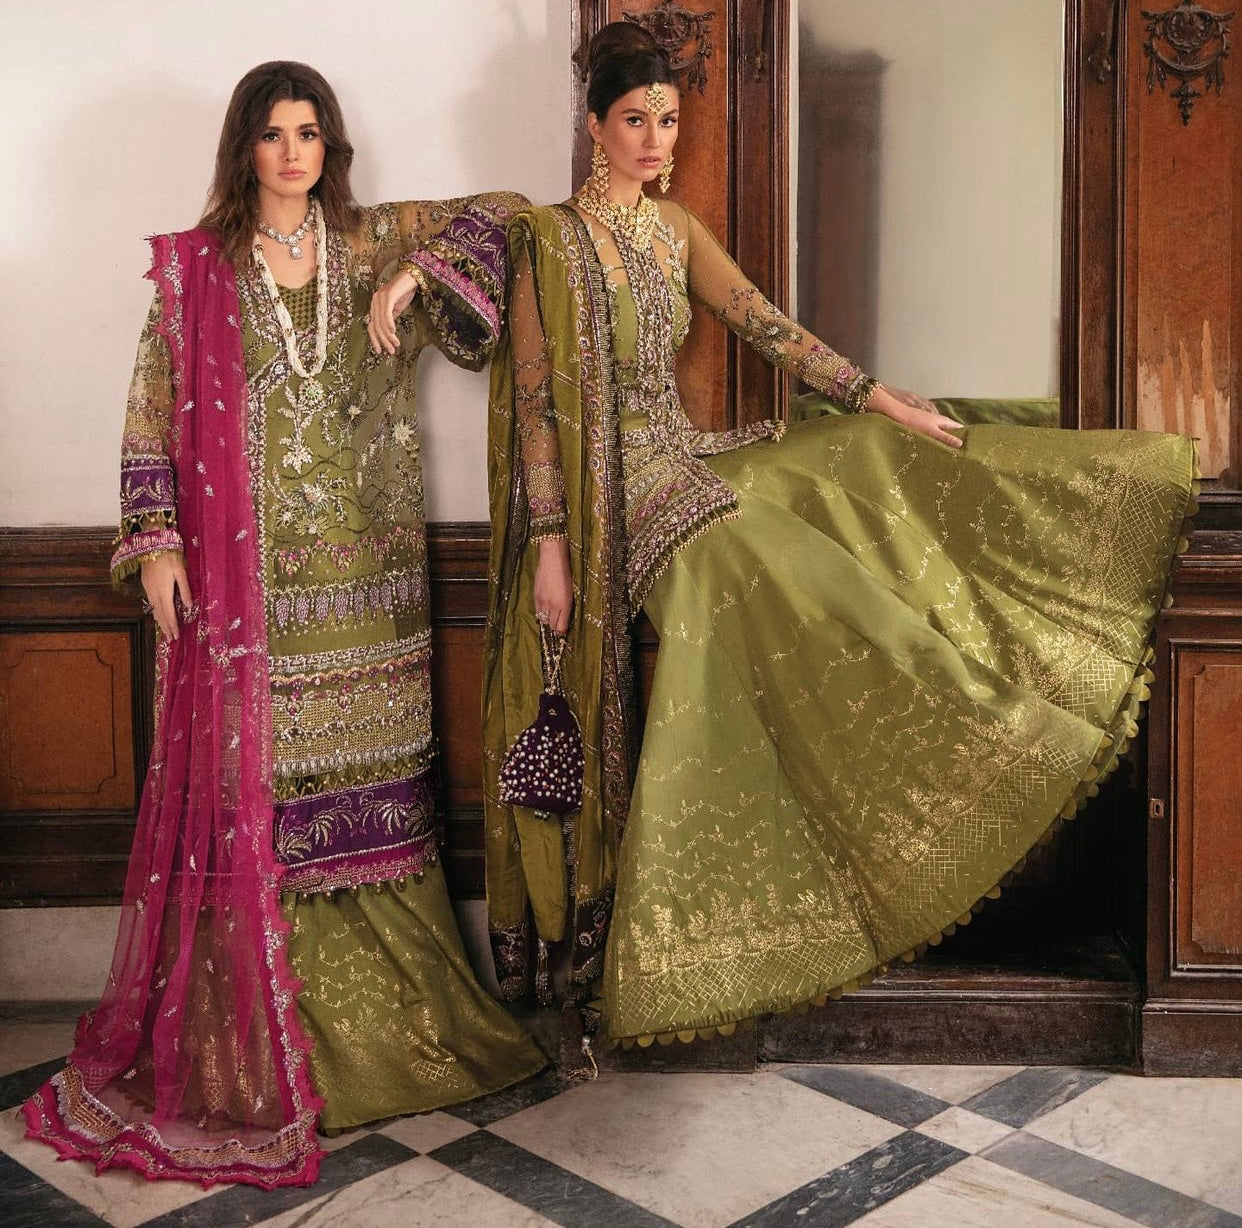 https://www.lebaasonline.co.uk/collections/gulaal-wedding-collection/products/gulaal-luxury-formals-eid-collection-2021-zuria-d-3